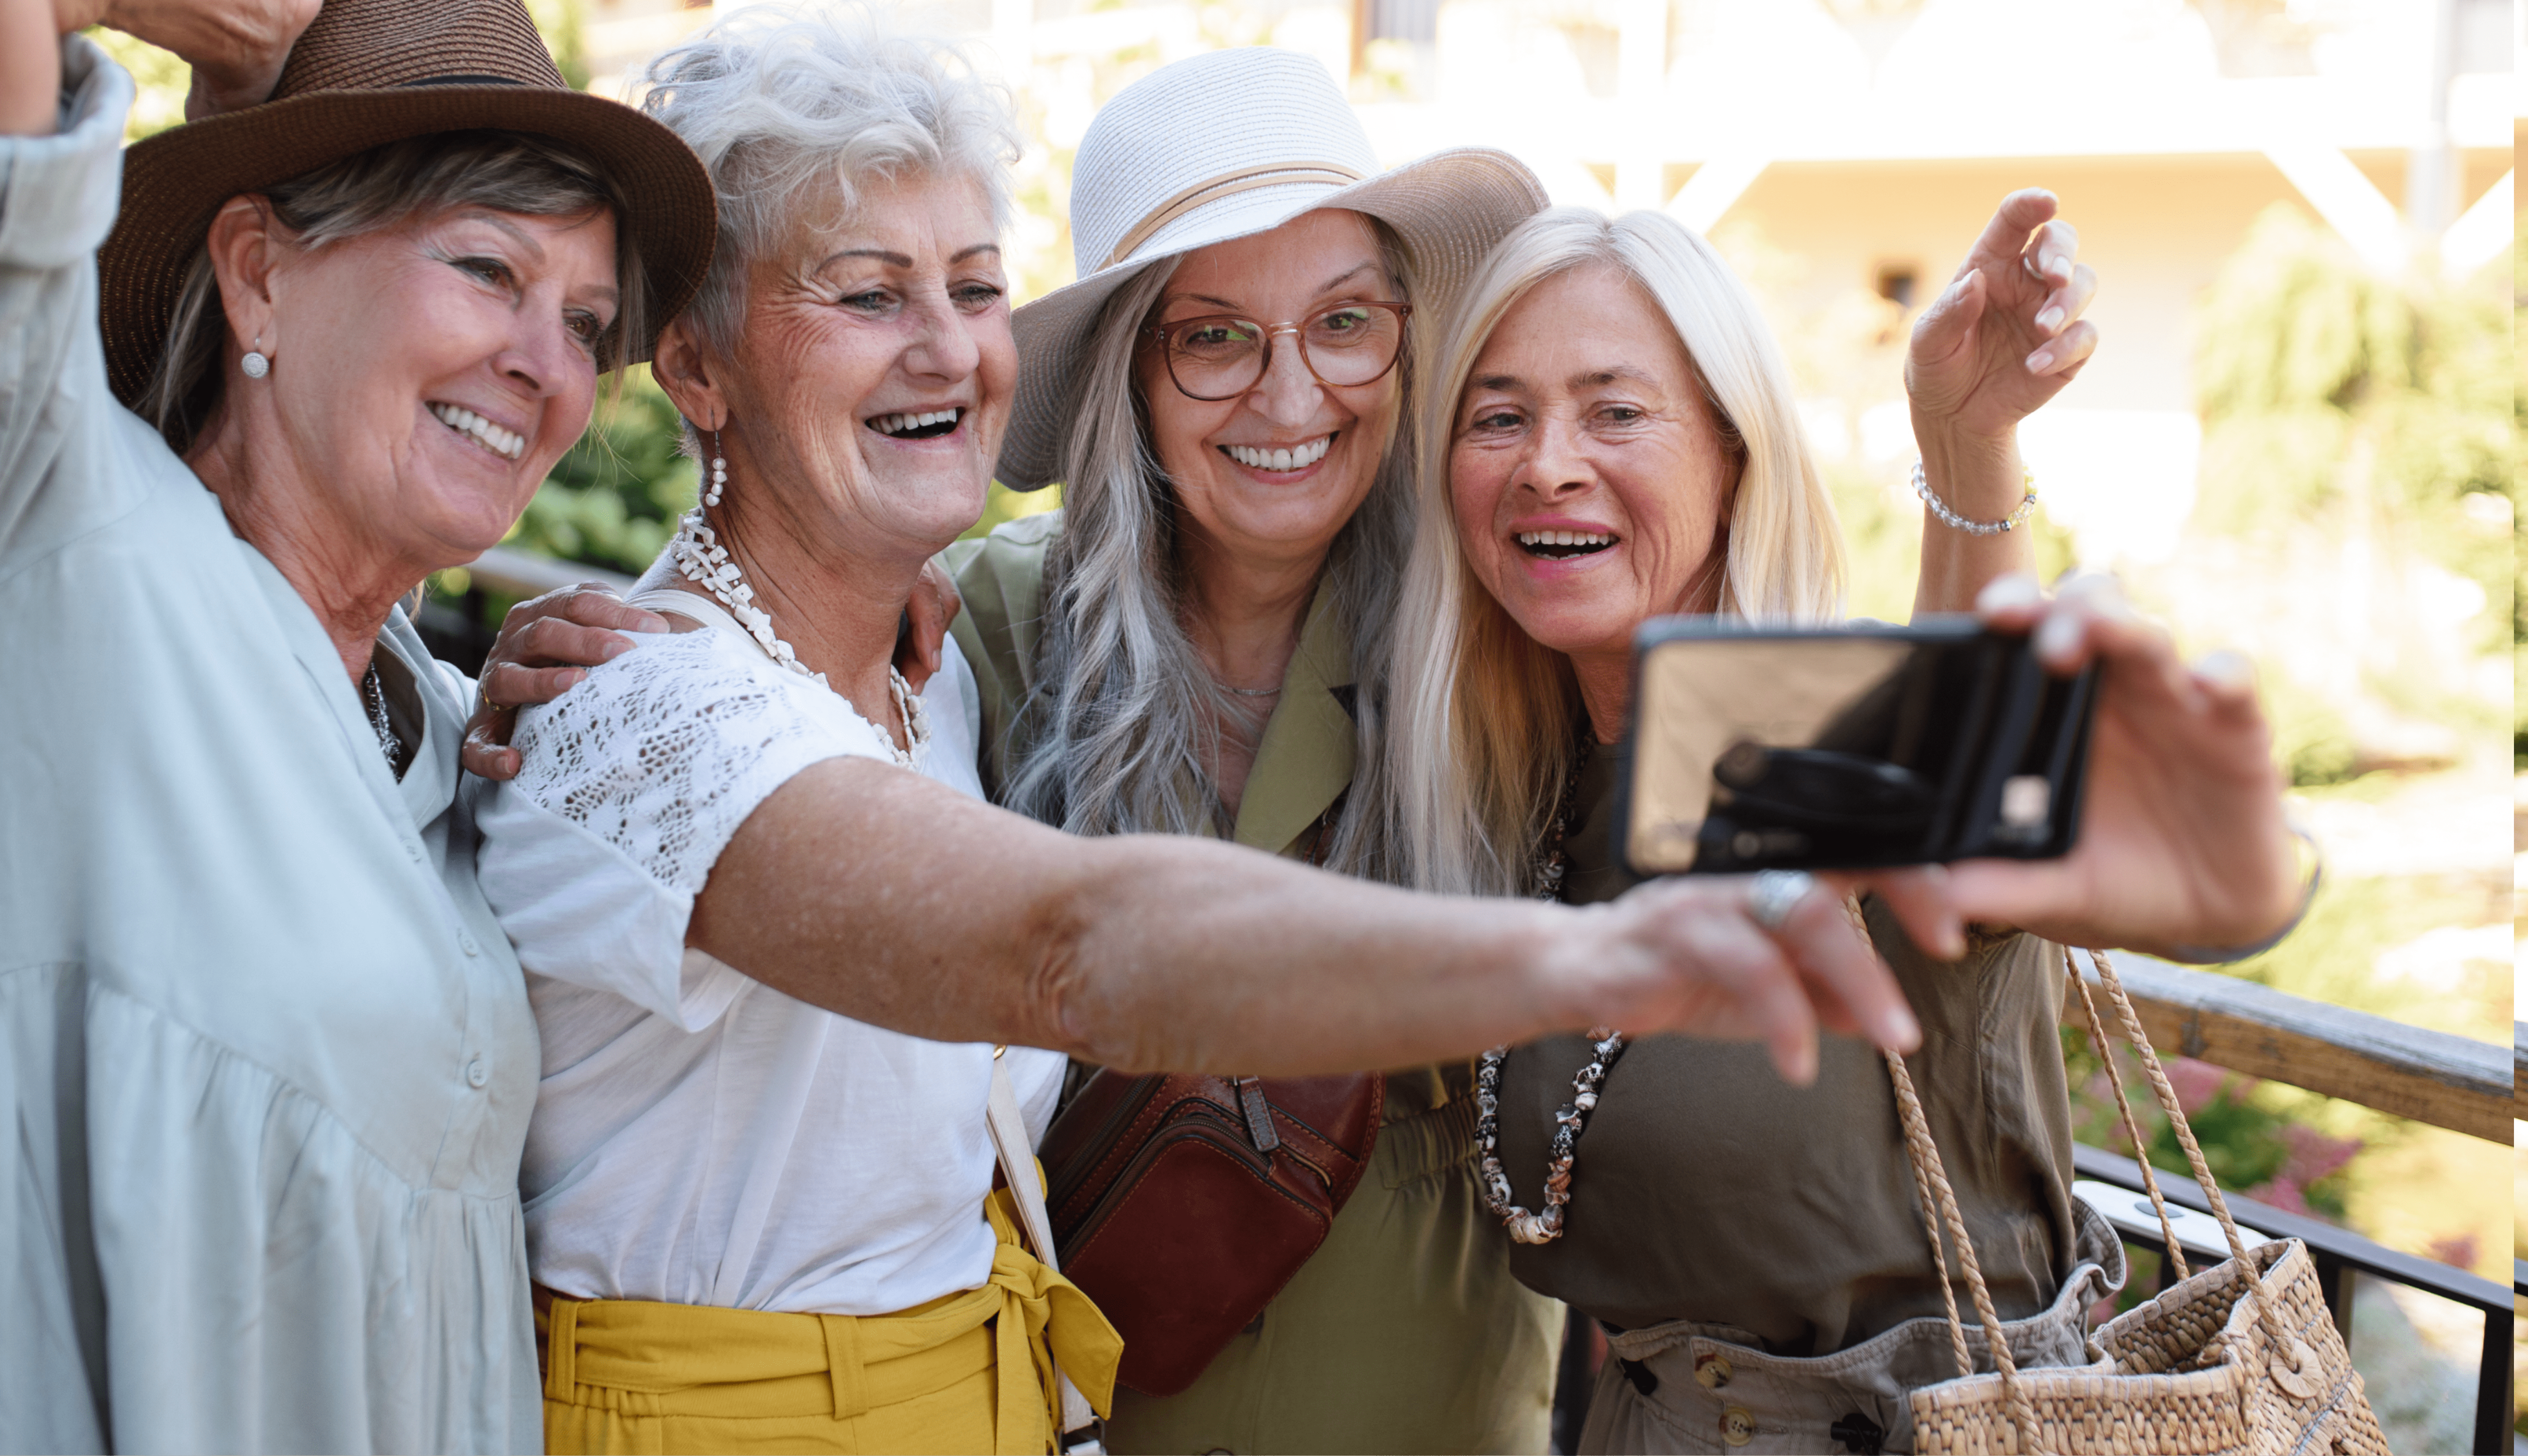 Four women taking a selfie and smiling together.